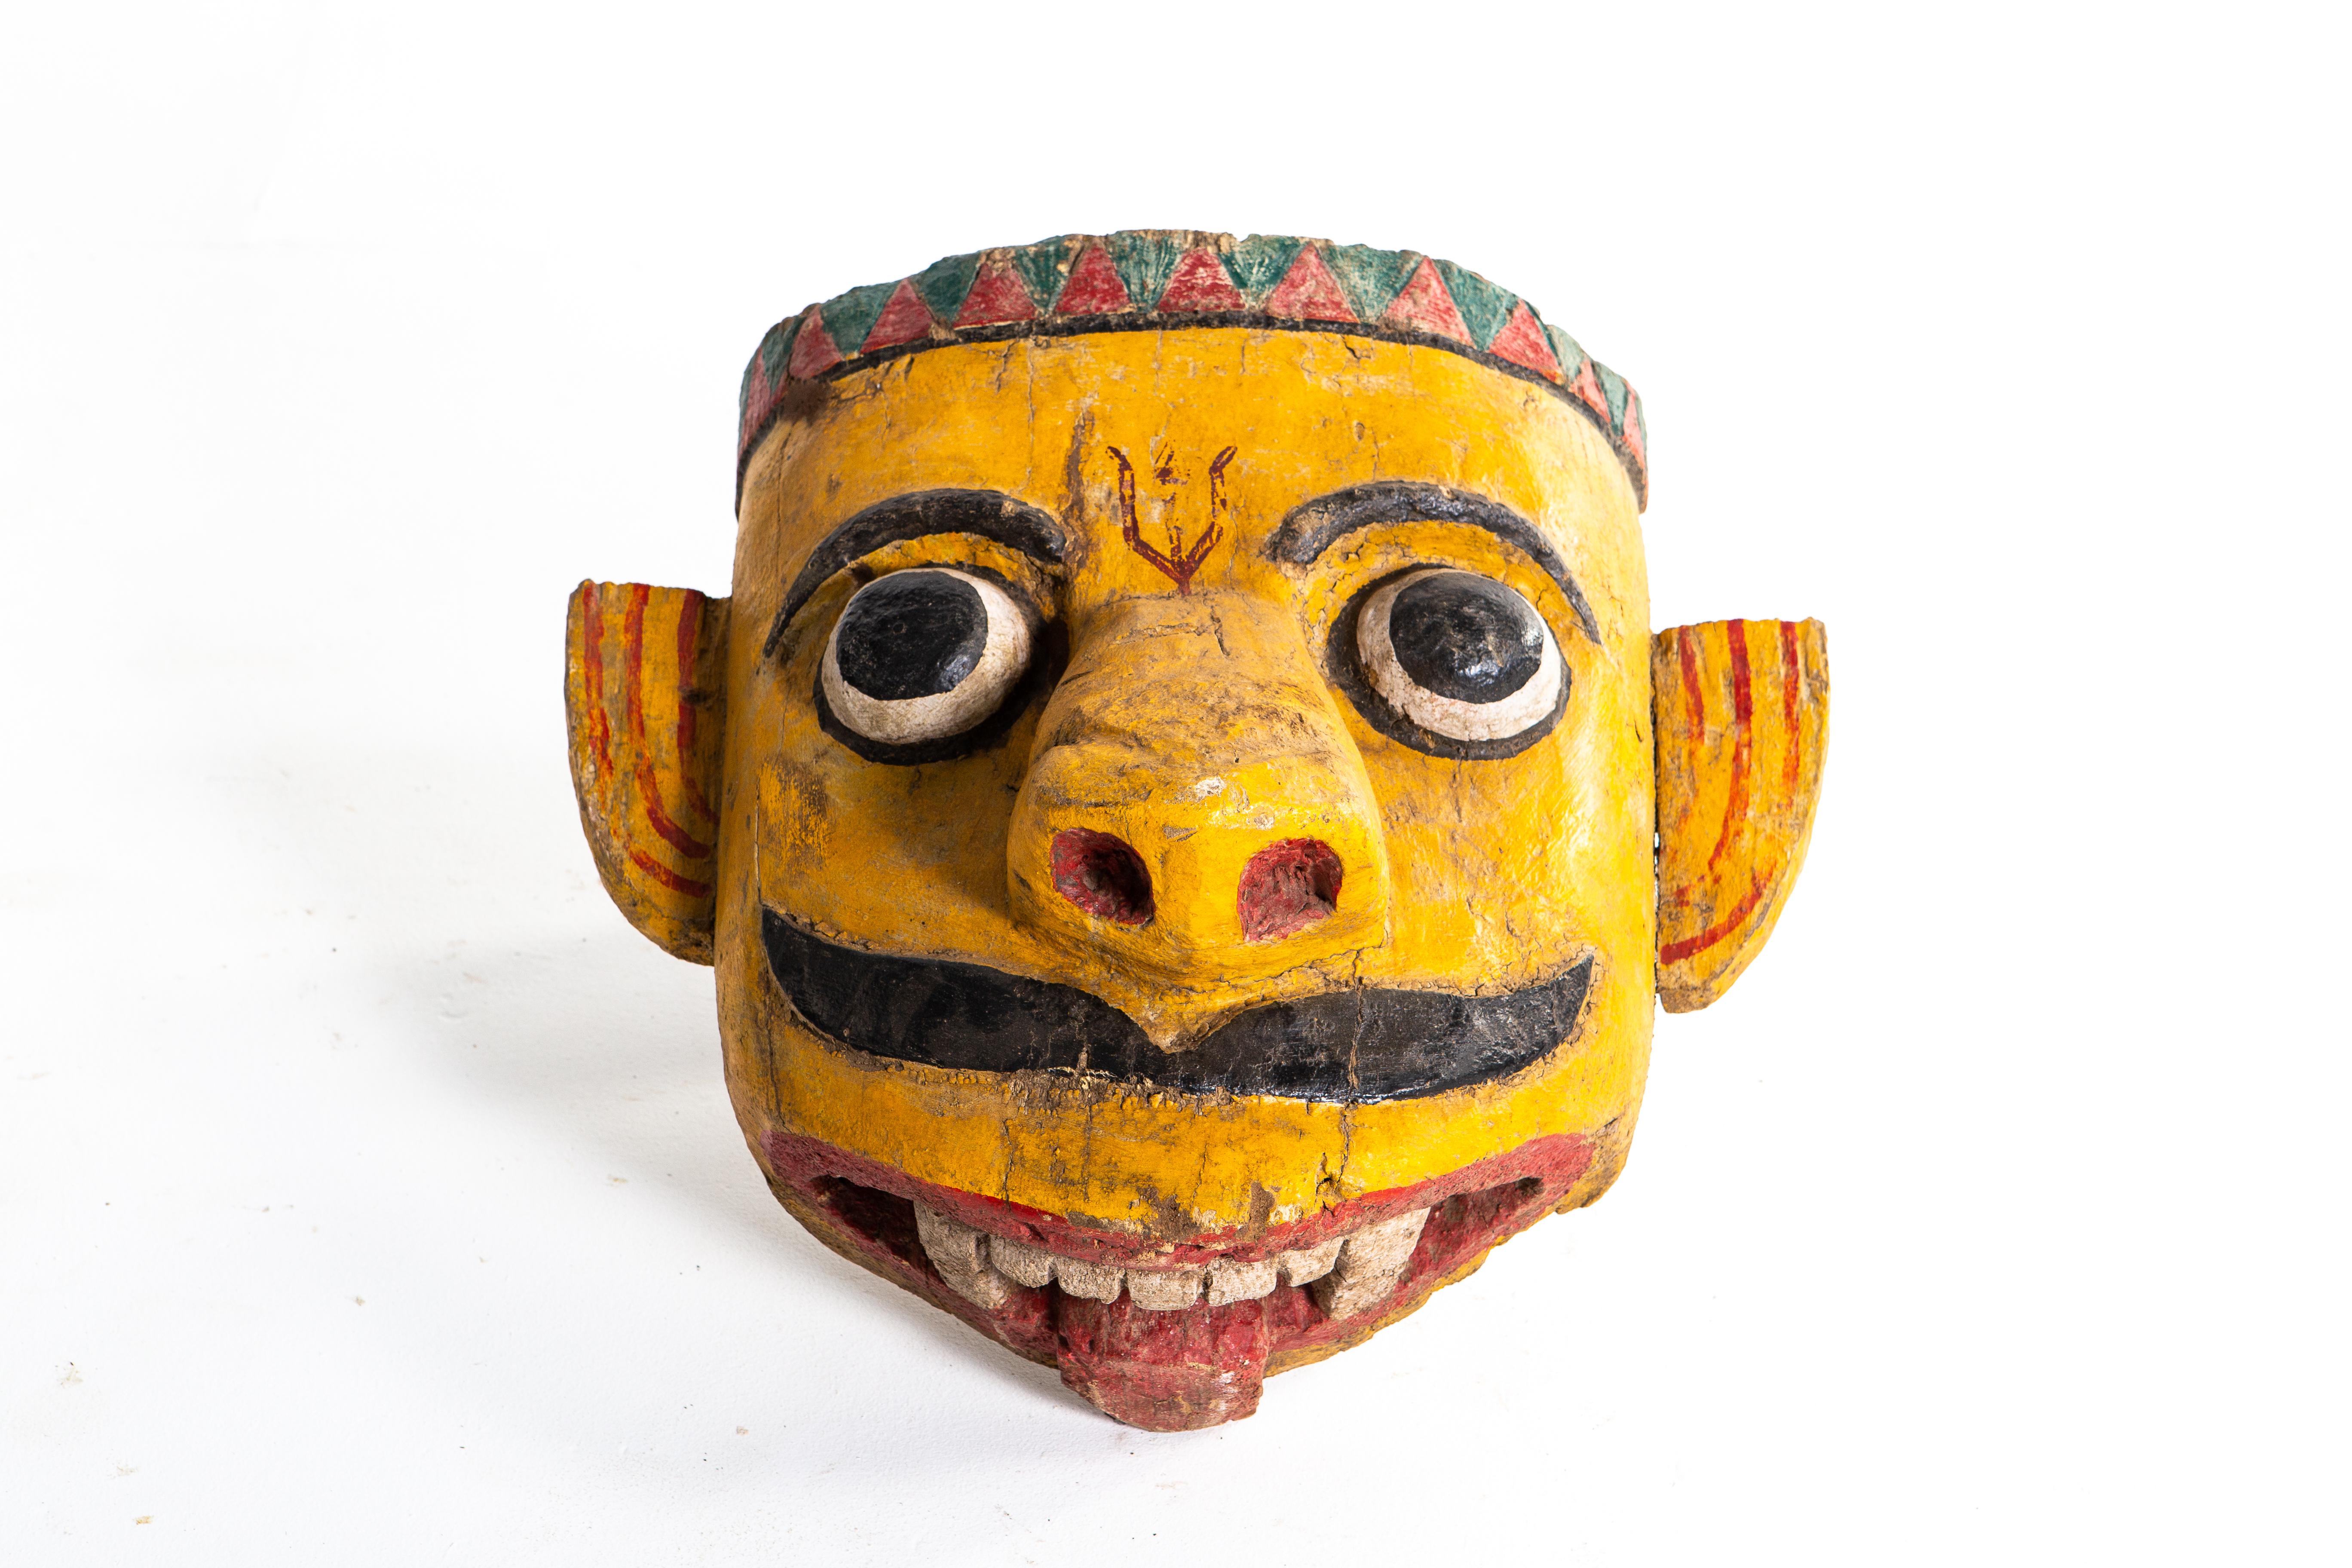 Poly-chrome wooden mask from Rajasthan, India, made from sheesham wood, circa 20th century. The mask features a grotesque smile that is designed to ward off the evil eye. According to traditional beliefs, a beautiful mask would only lure envy and